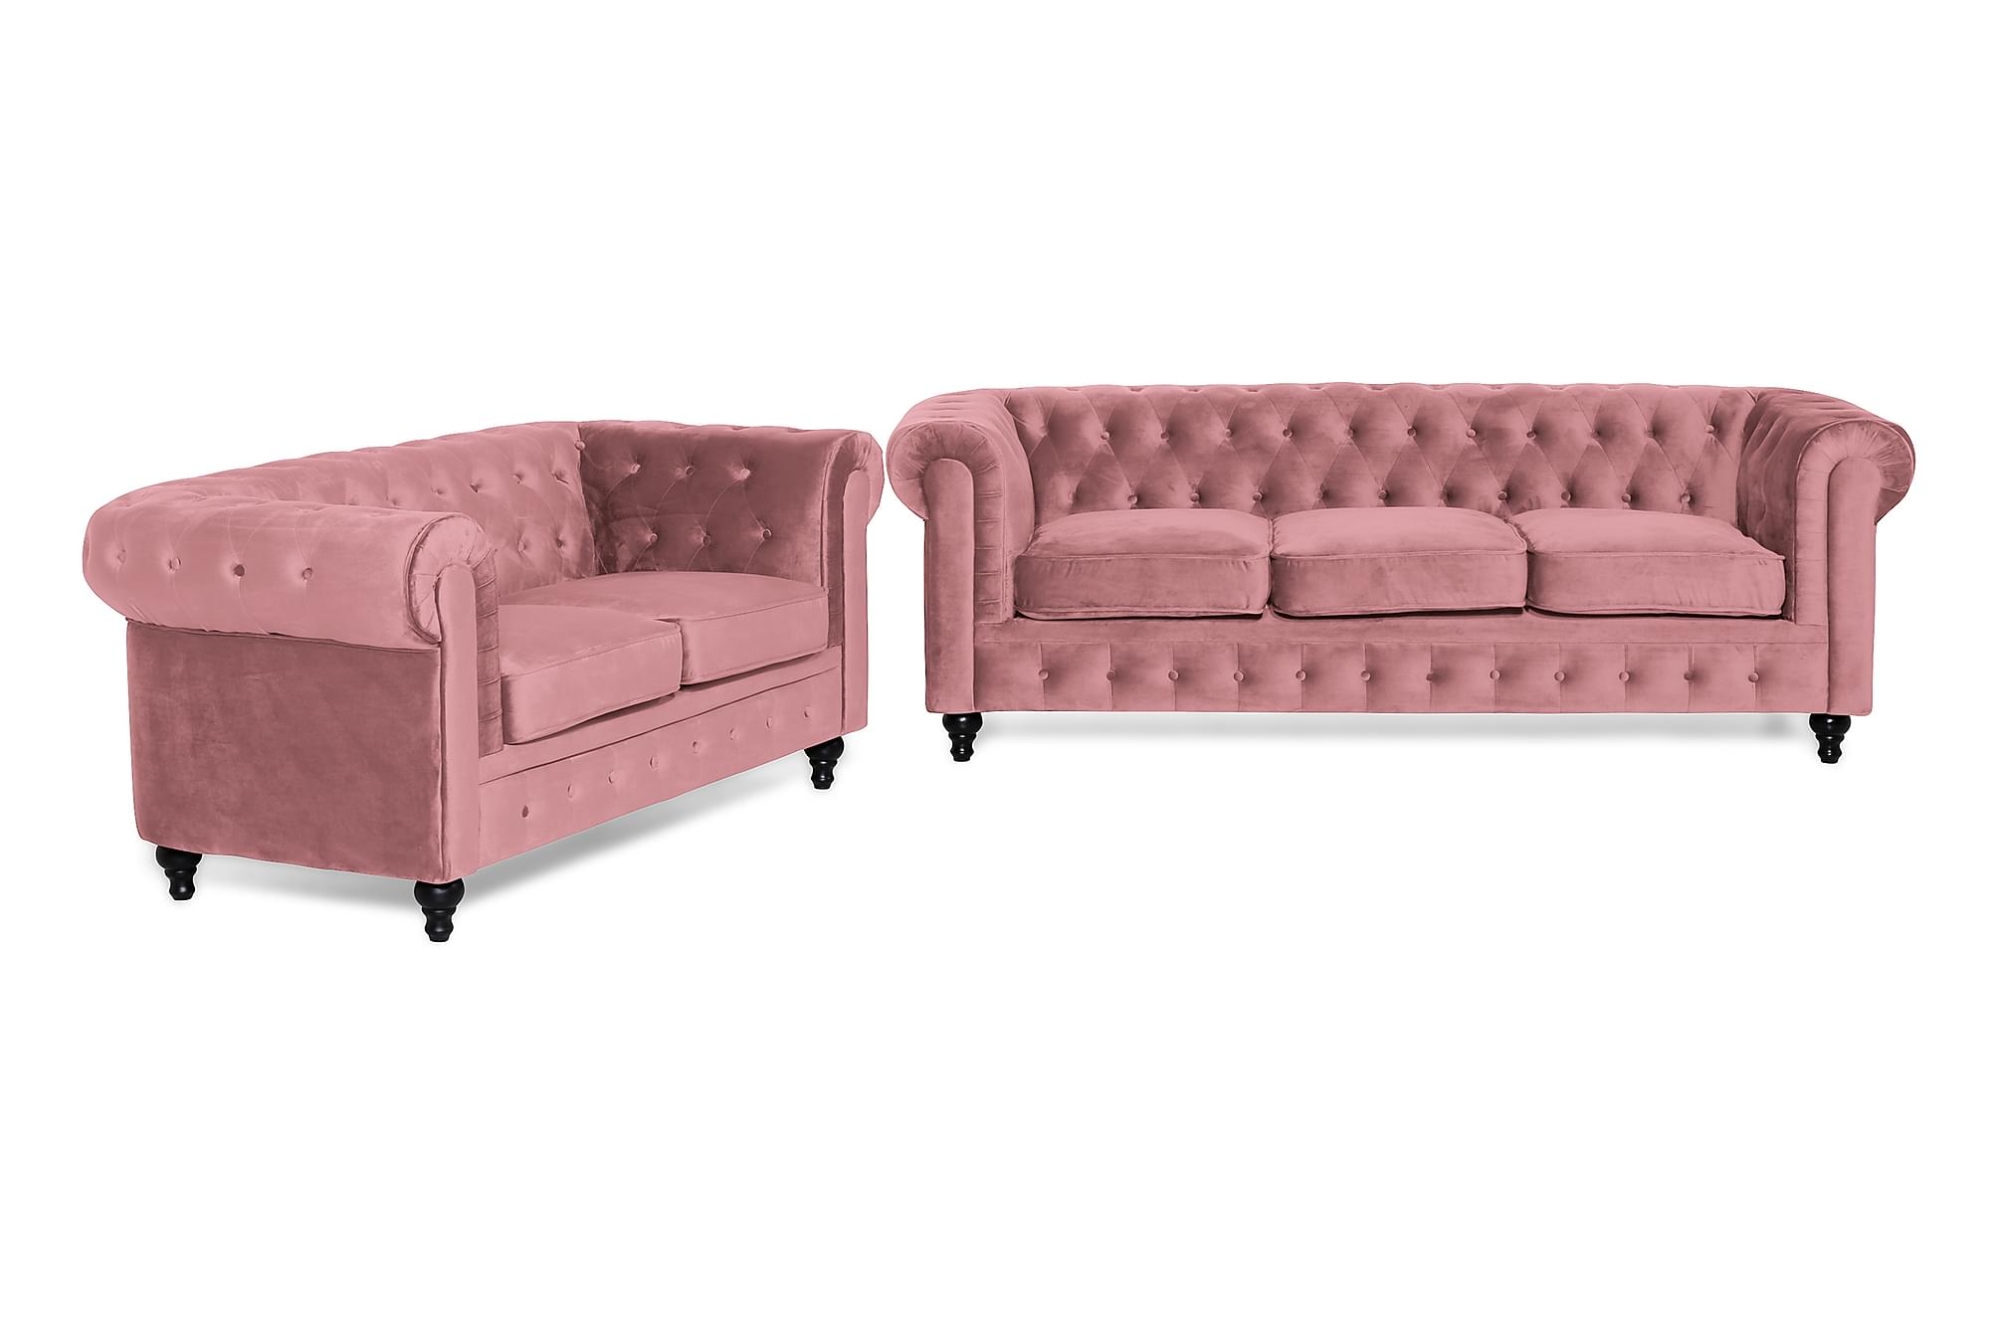 #2 - Chesterfield Lyx Sofagruppe (3 Pers. + 2 Pers. Sofa), Rosa Velour